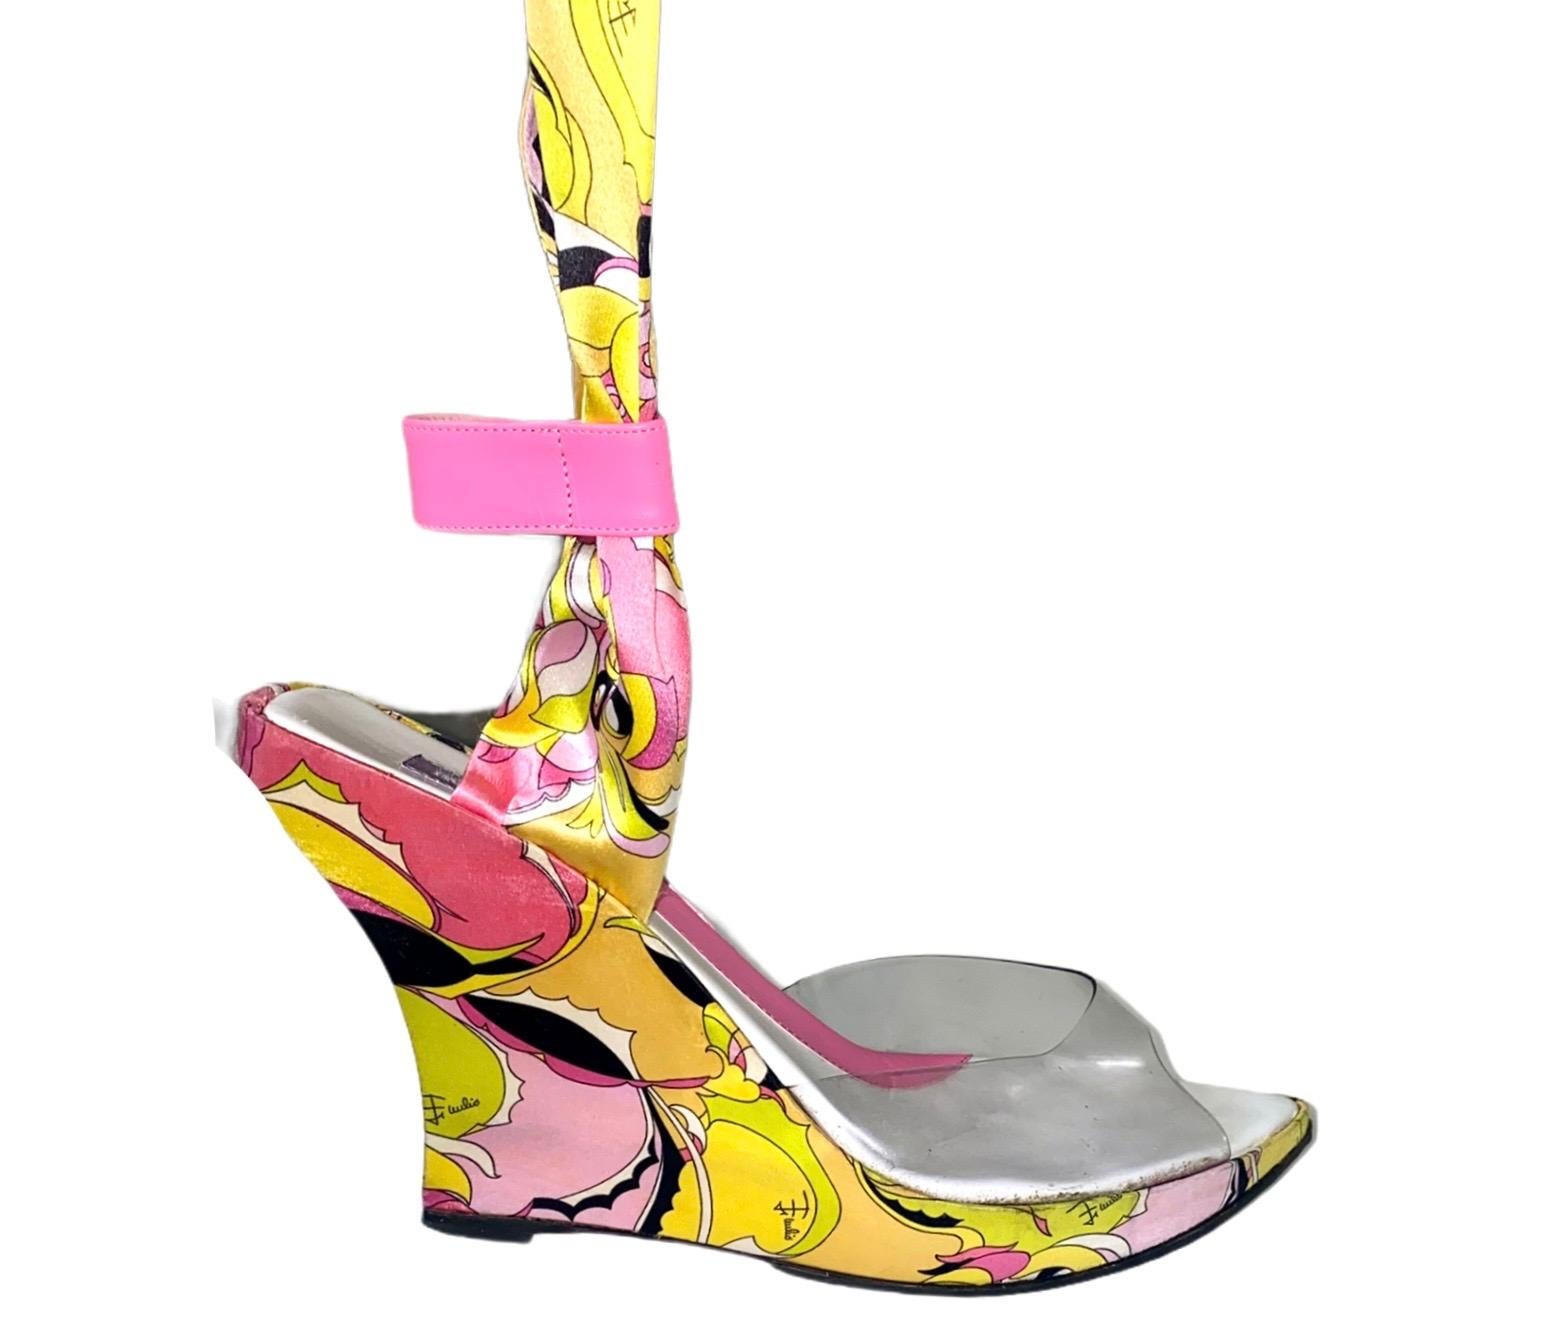 Stunning pink and multicolor satin Emilio Pucci wedges 
PVC paneling at vamps
Emilio Pucci signature print on silk satin fabric  with 